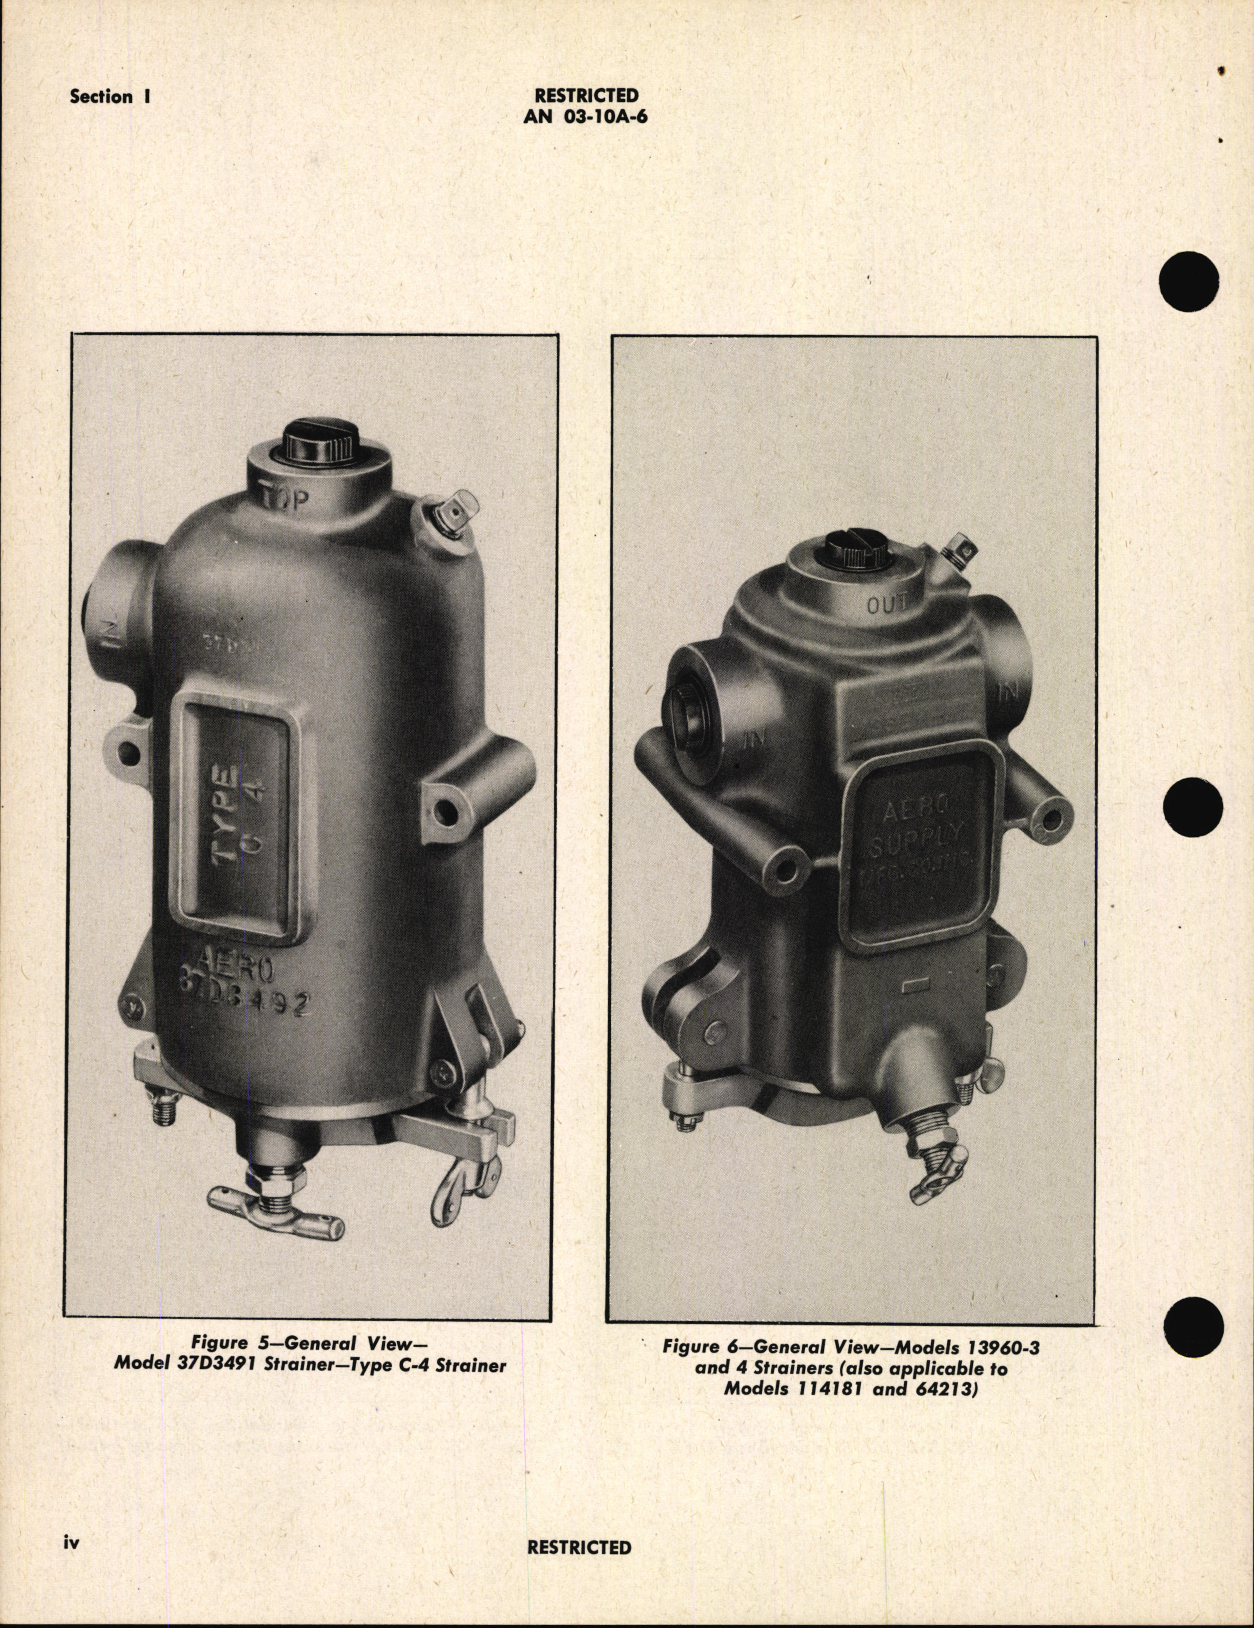 Sample page 6 from AirCorps Library document: Handbook of Instructions with Parts Catalog for Fuel System Units, Hand Fuel Pumps, Fuel System Strainers, and Relief Valves